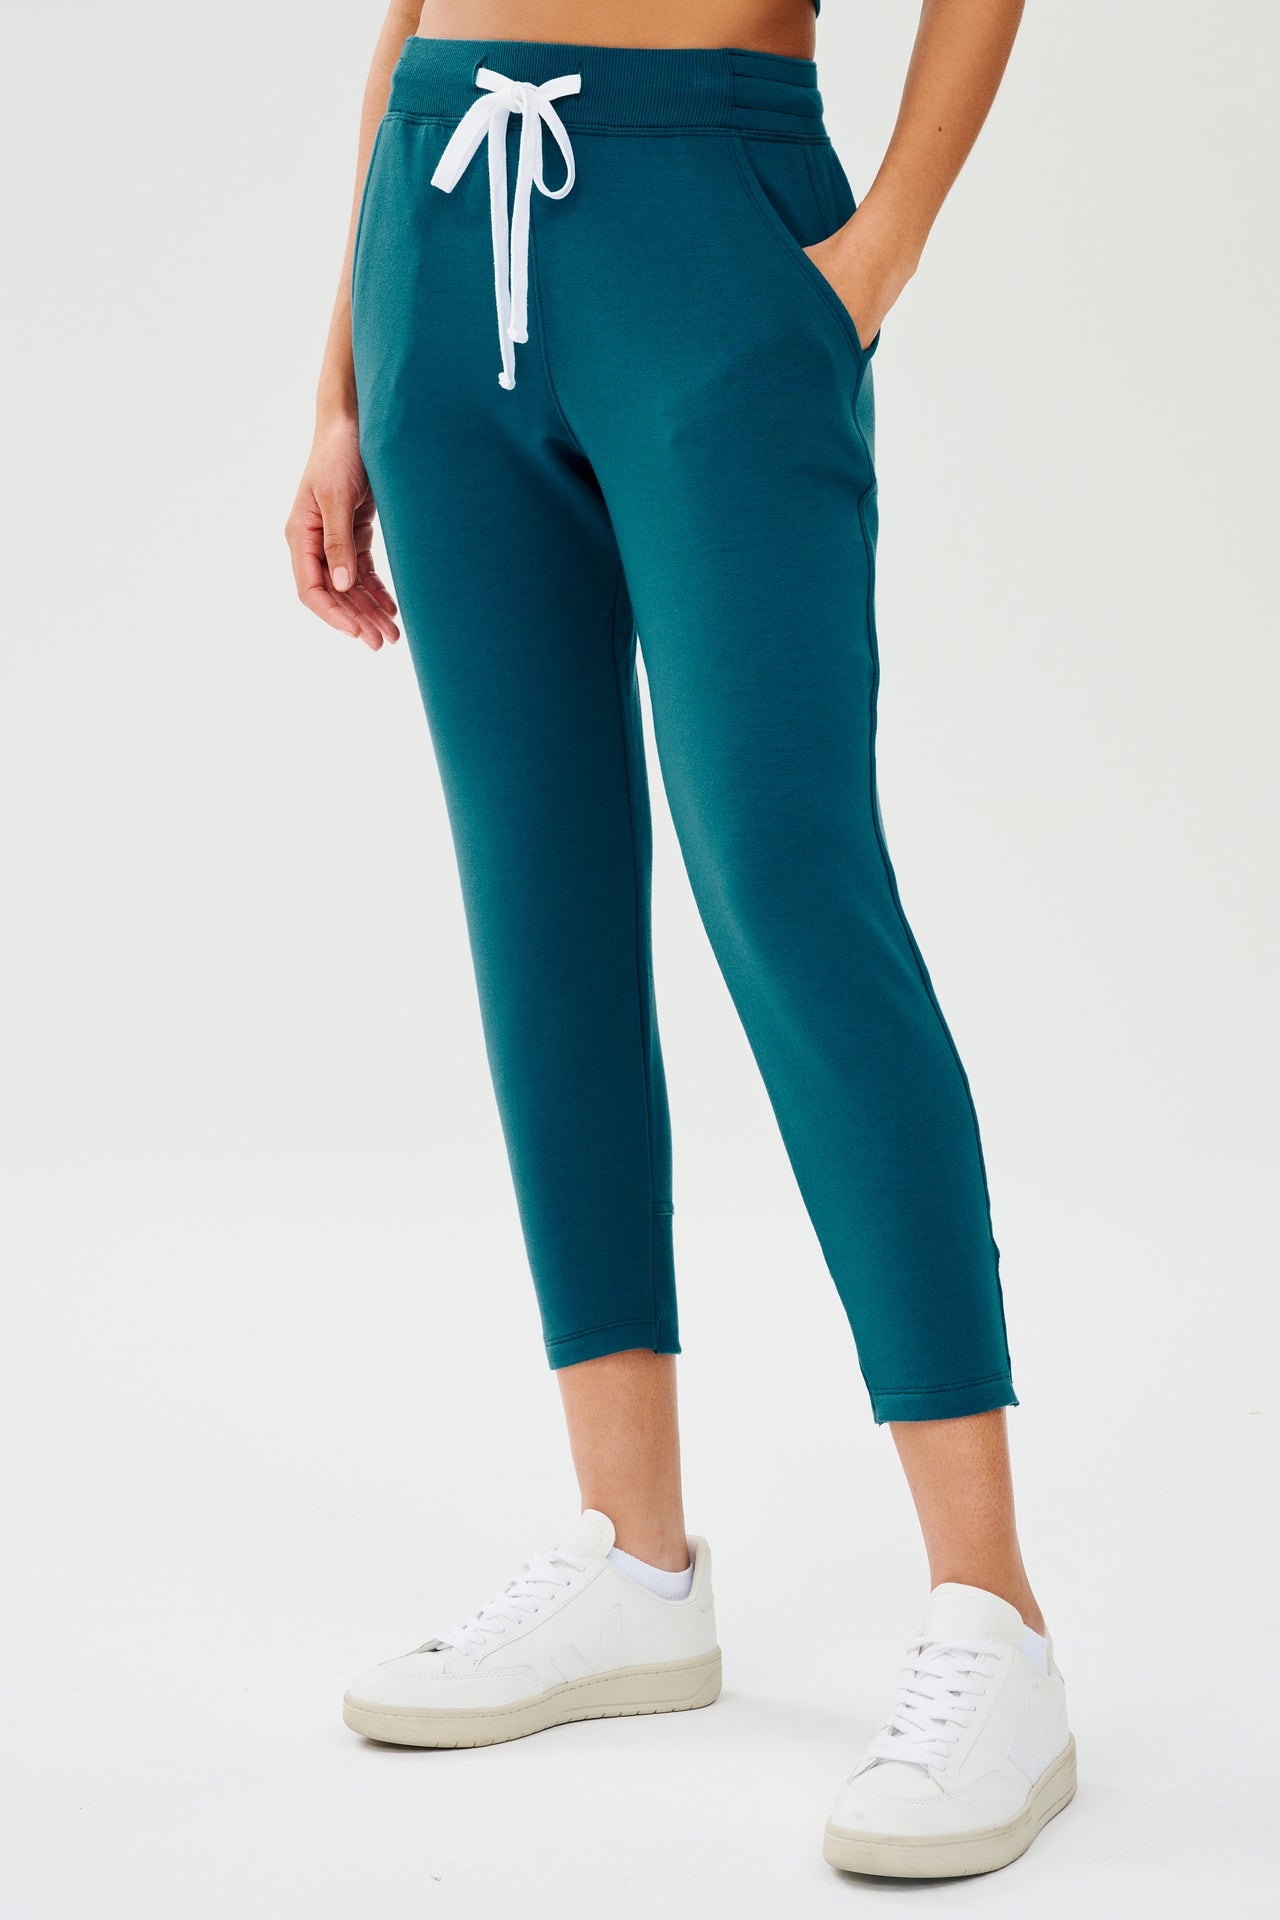 Front side view of woman wearing a green and blue tone sweatpant with tapered leg and above ankle length with white drawstring and side hip pockets. Paired with white shoes.